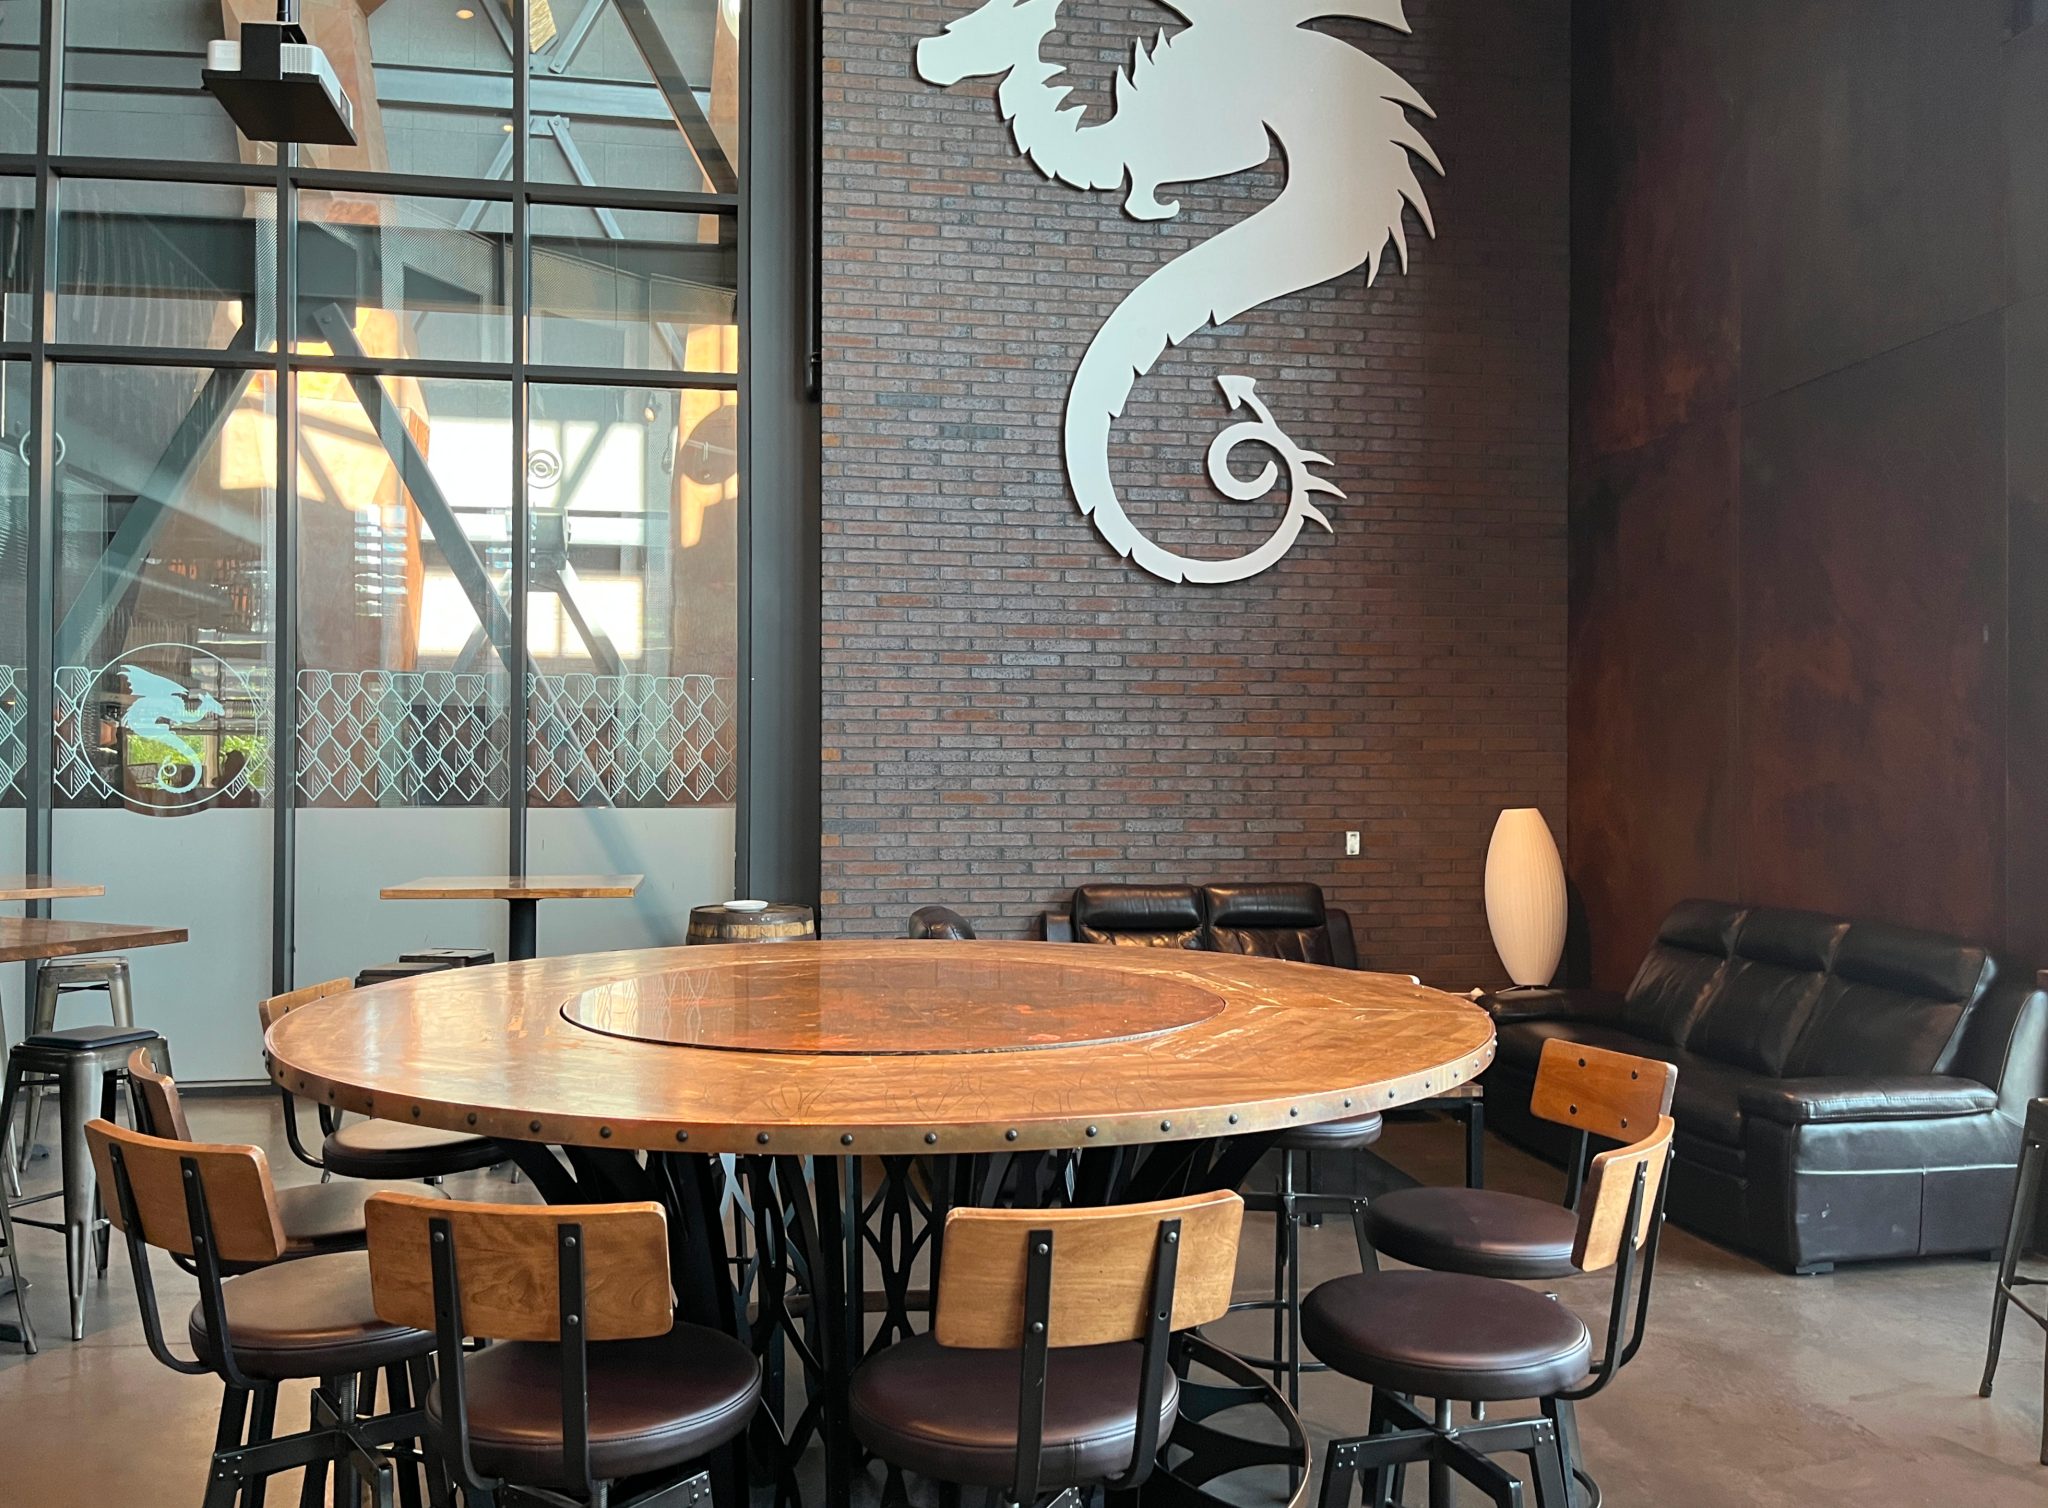 Round wooden table with a large steel dragon above it on the wall.